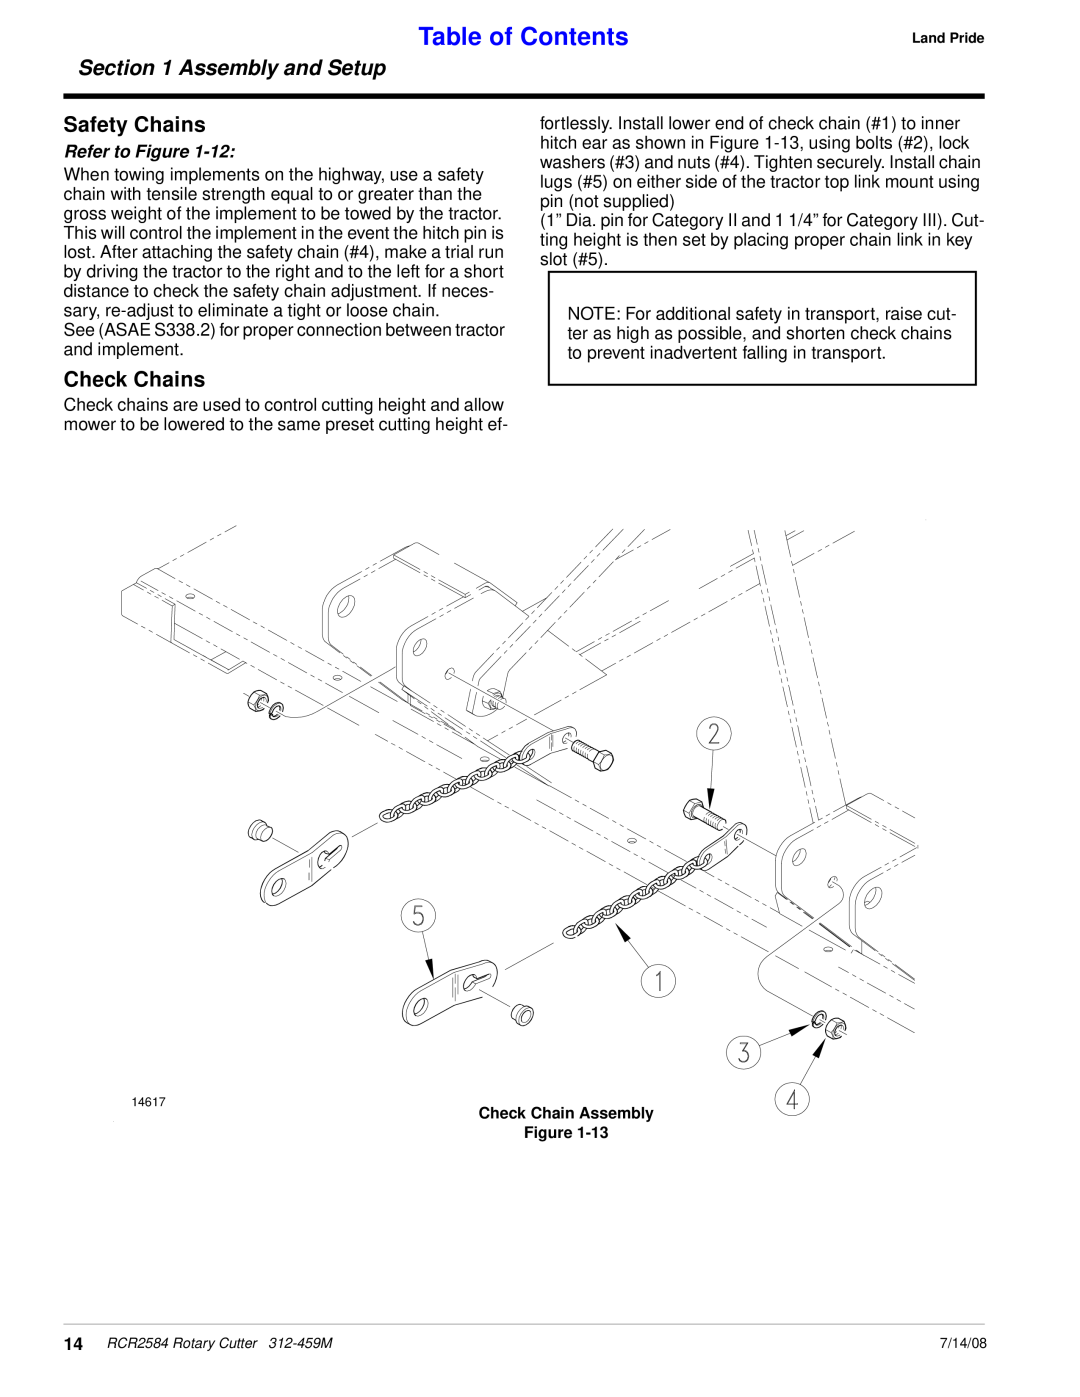 Land Pride RCR2584 manual Safety Chains, Check Chains, Table of Contents, Assembly and Setup, Refer to Figure 